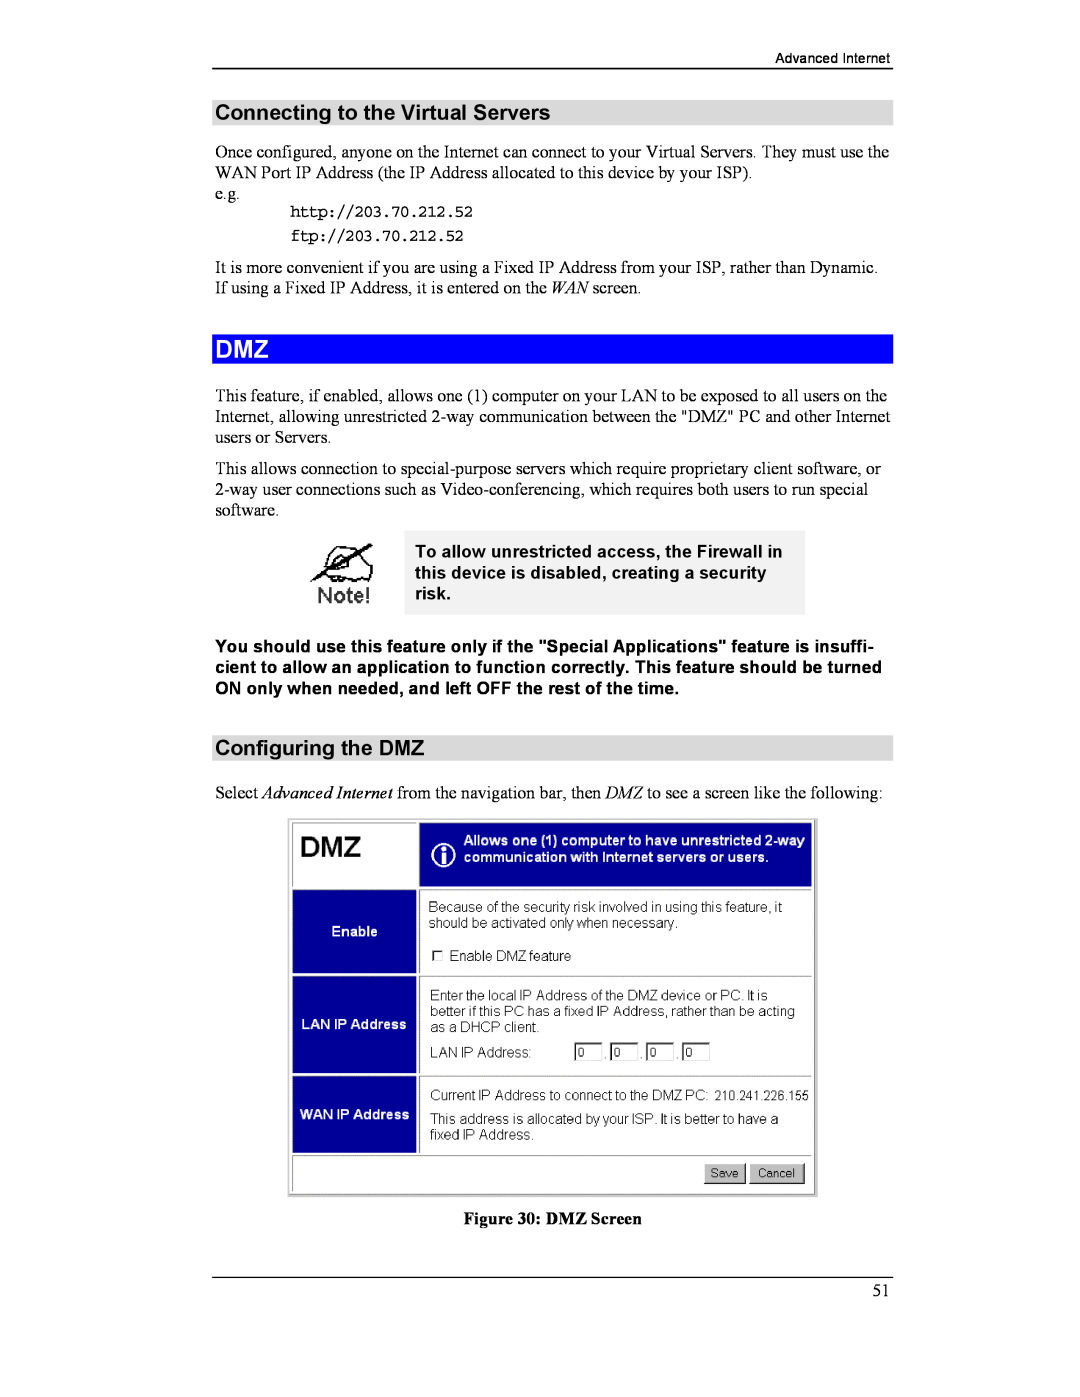 CNET CNWR-811P manual Connecting to the Virtual Servers, Configuring the DMZ 